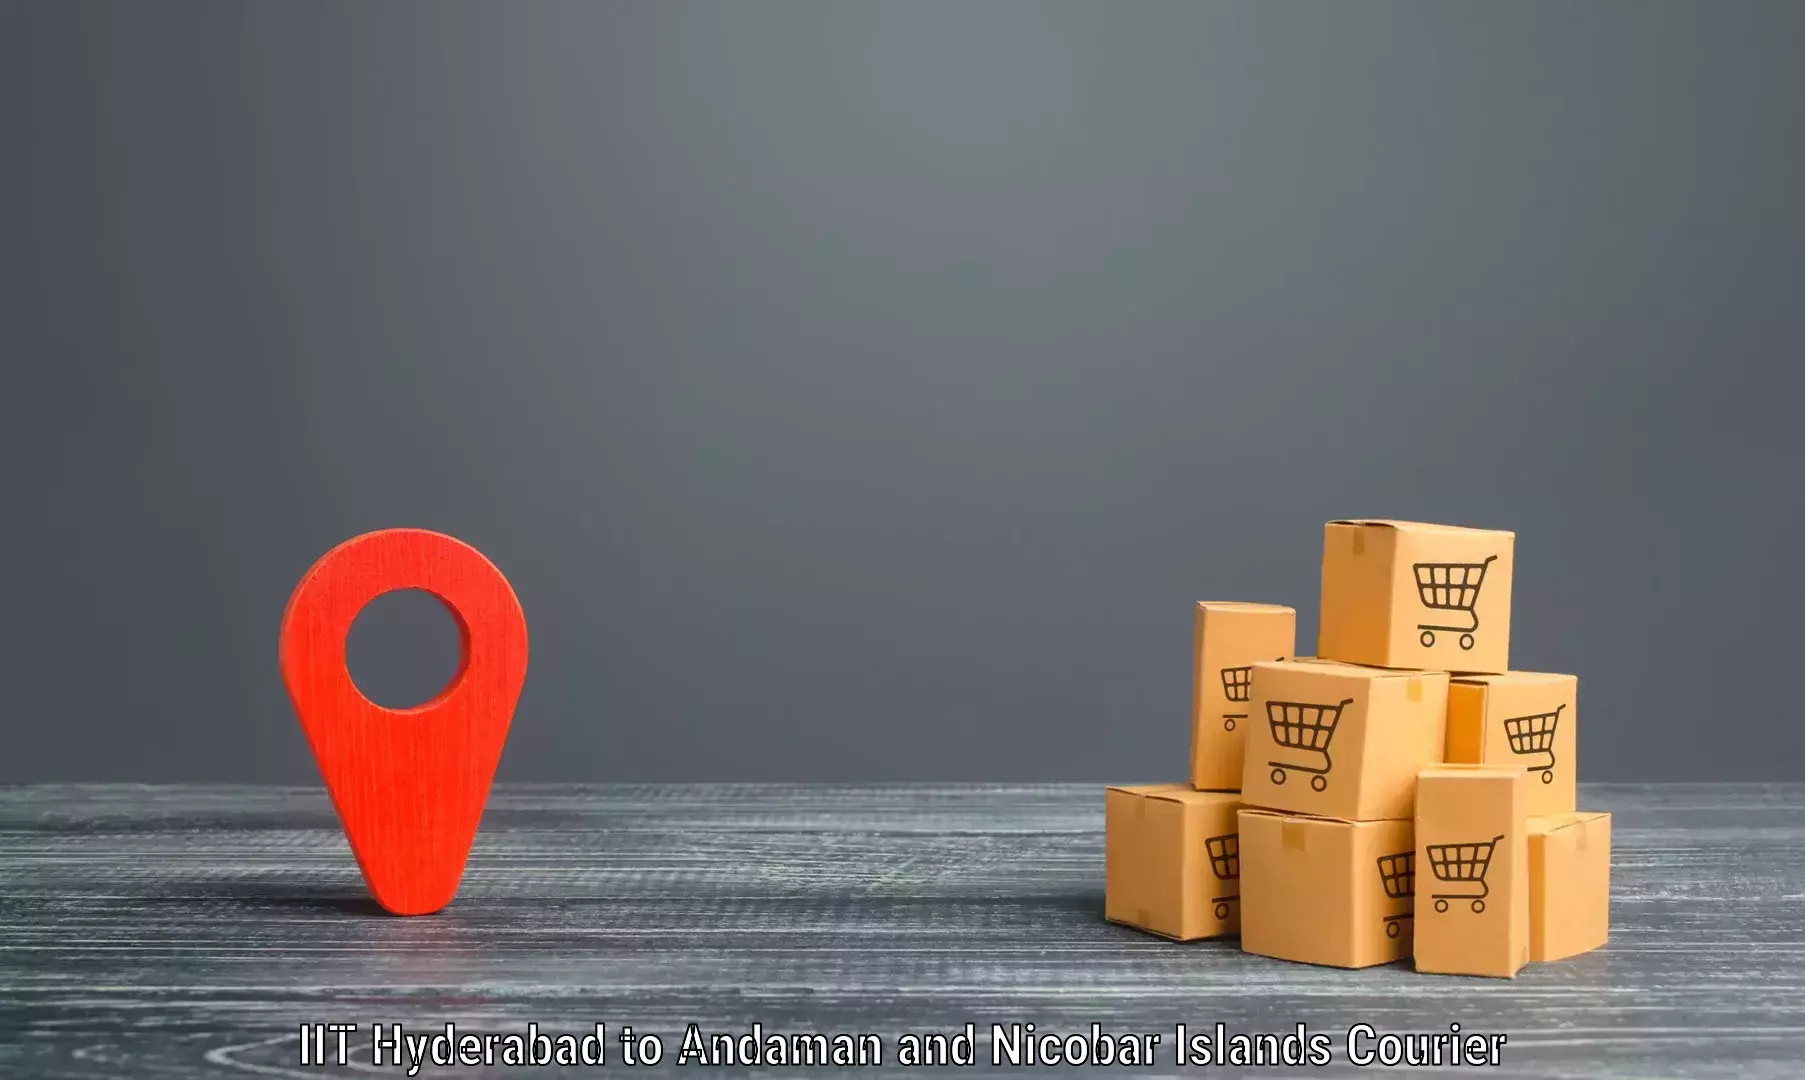 Wholesale parcel delivery in IIT Hyderabad to Andaman and Nicobar Islands